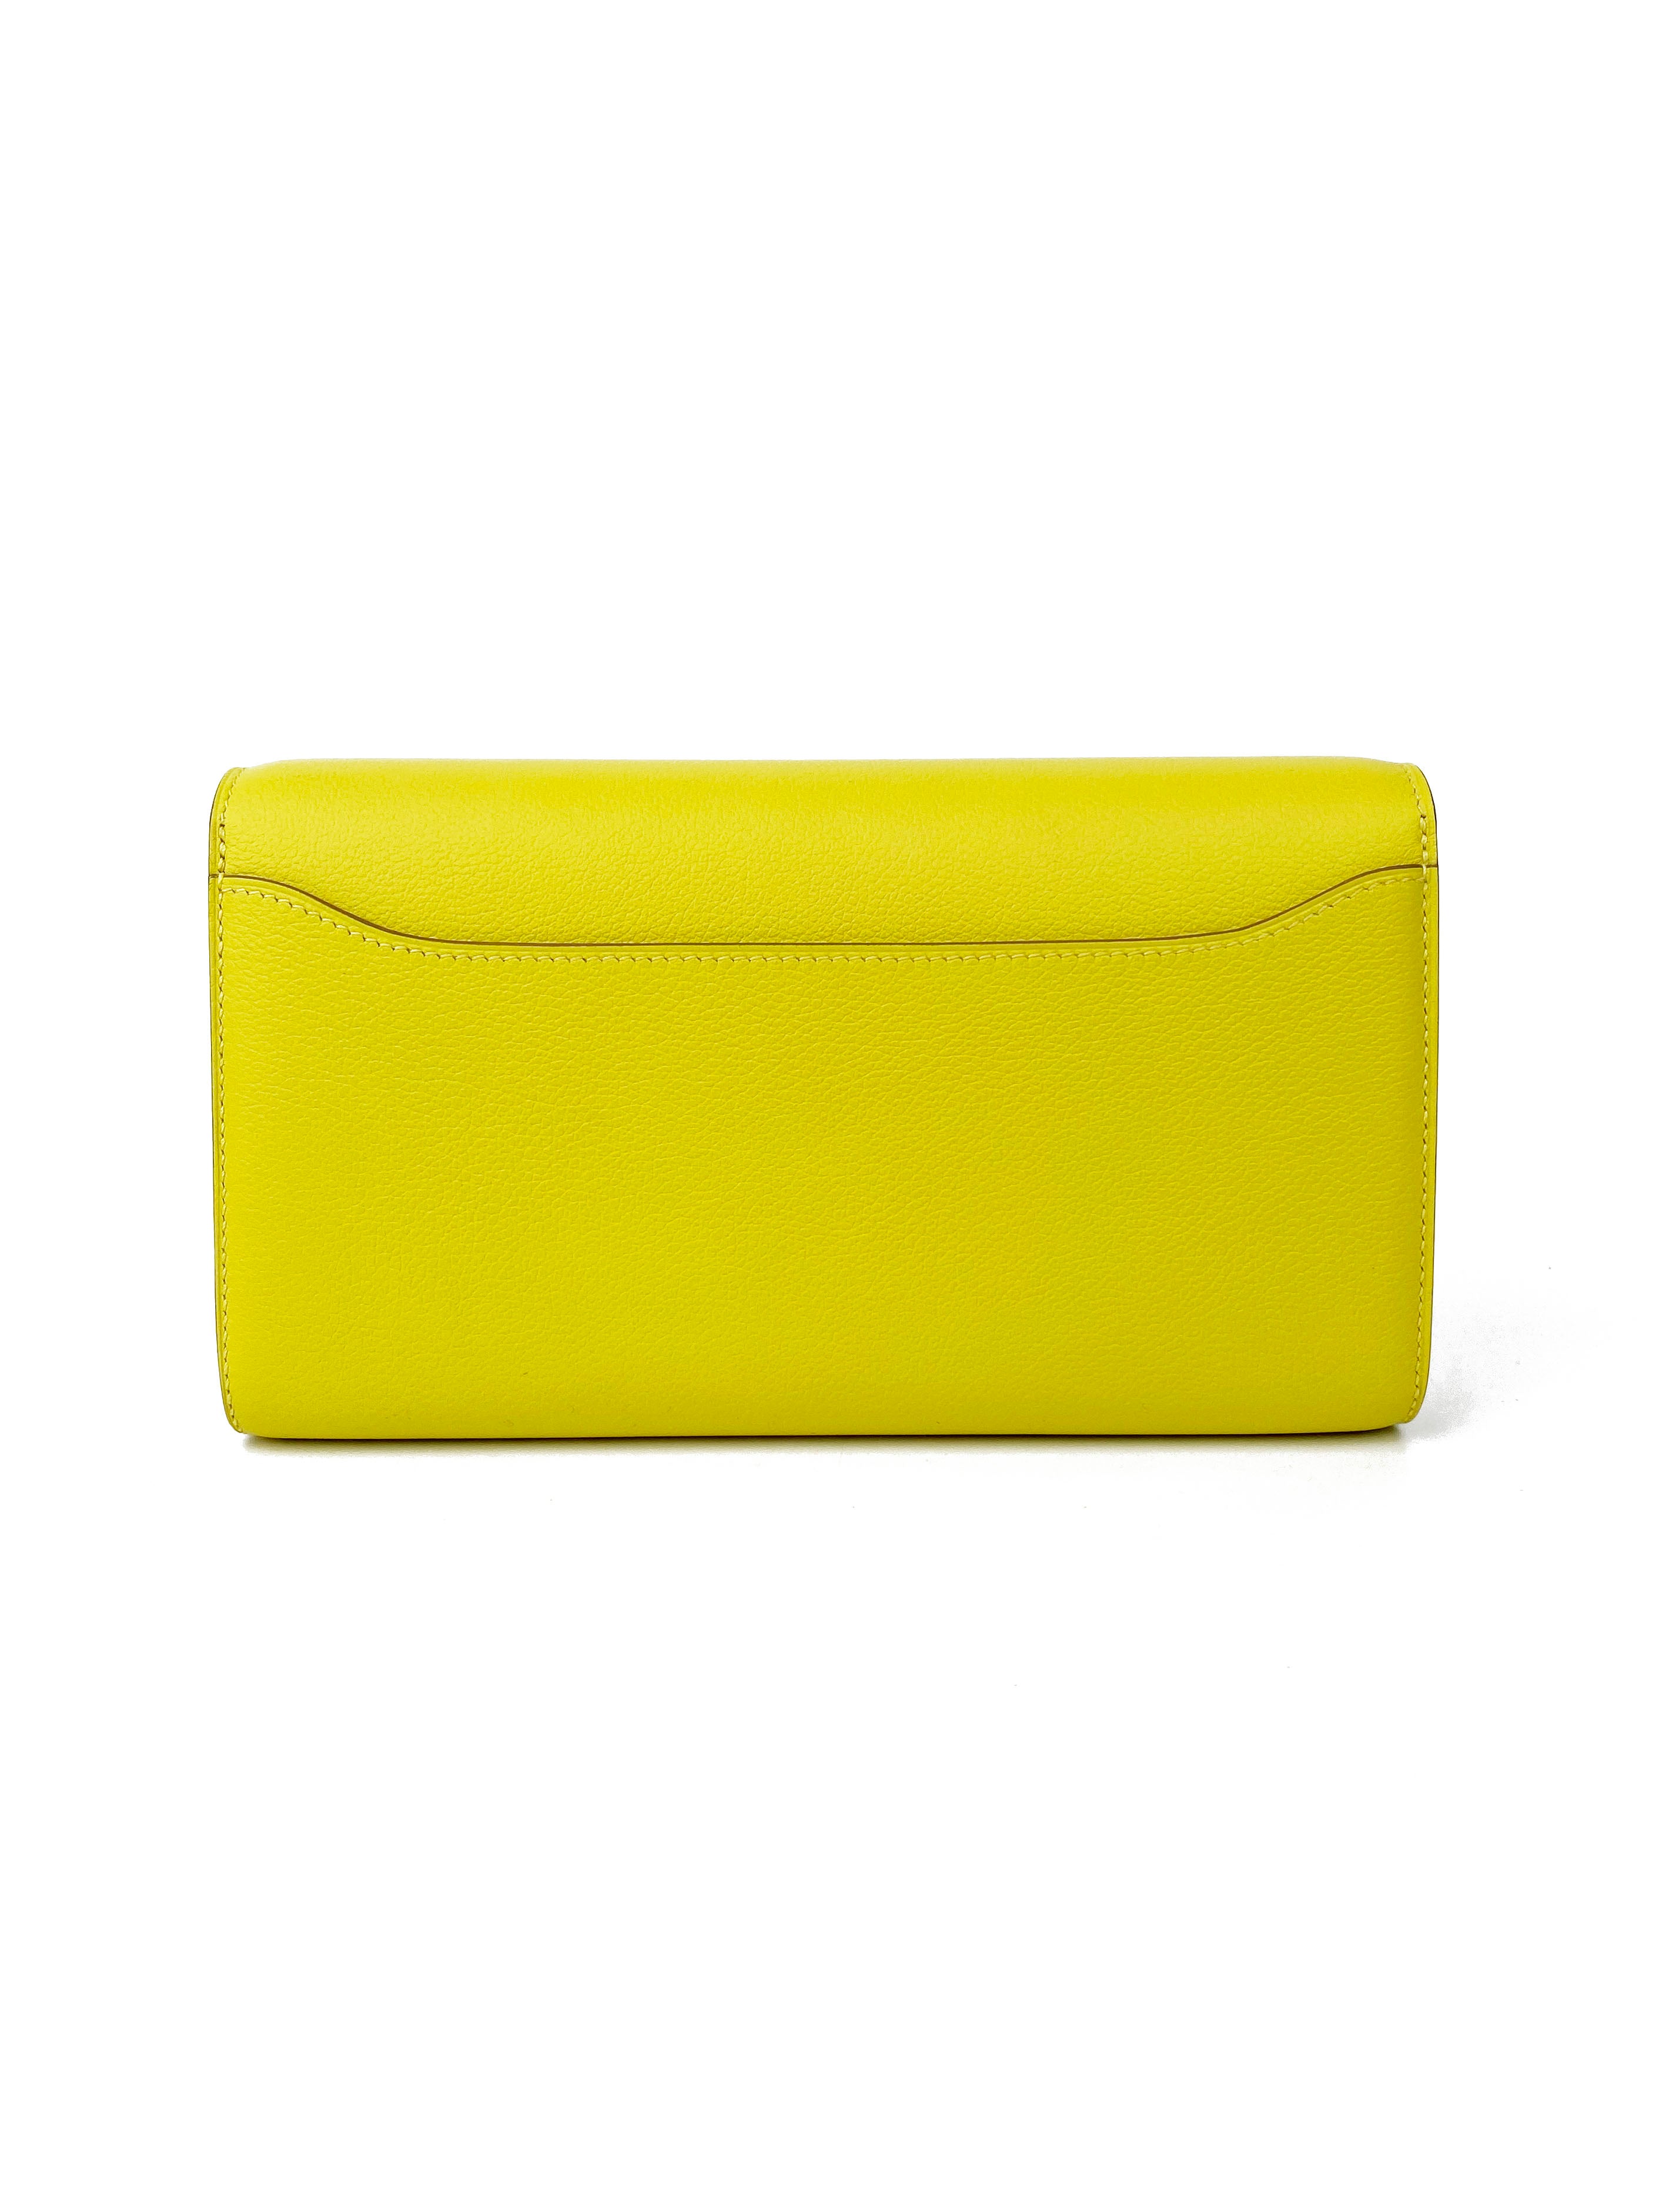 Hermes Lime Constance To Go Wallet